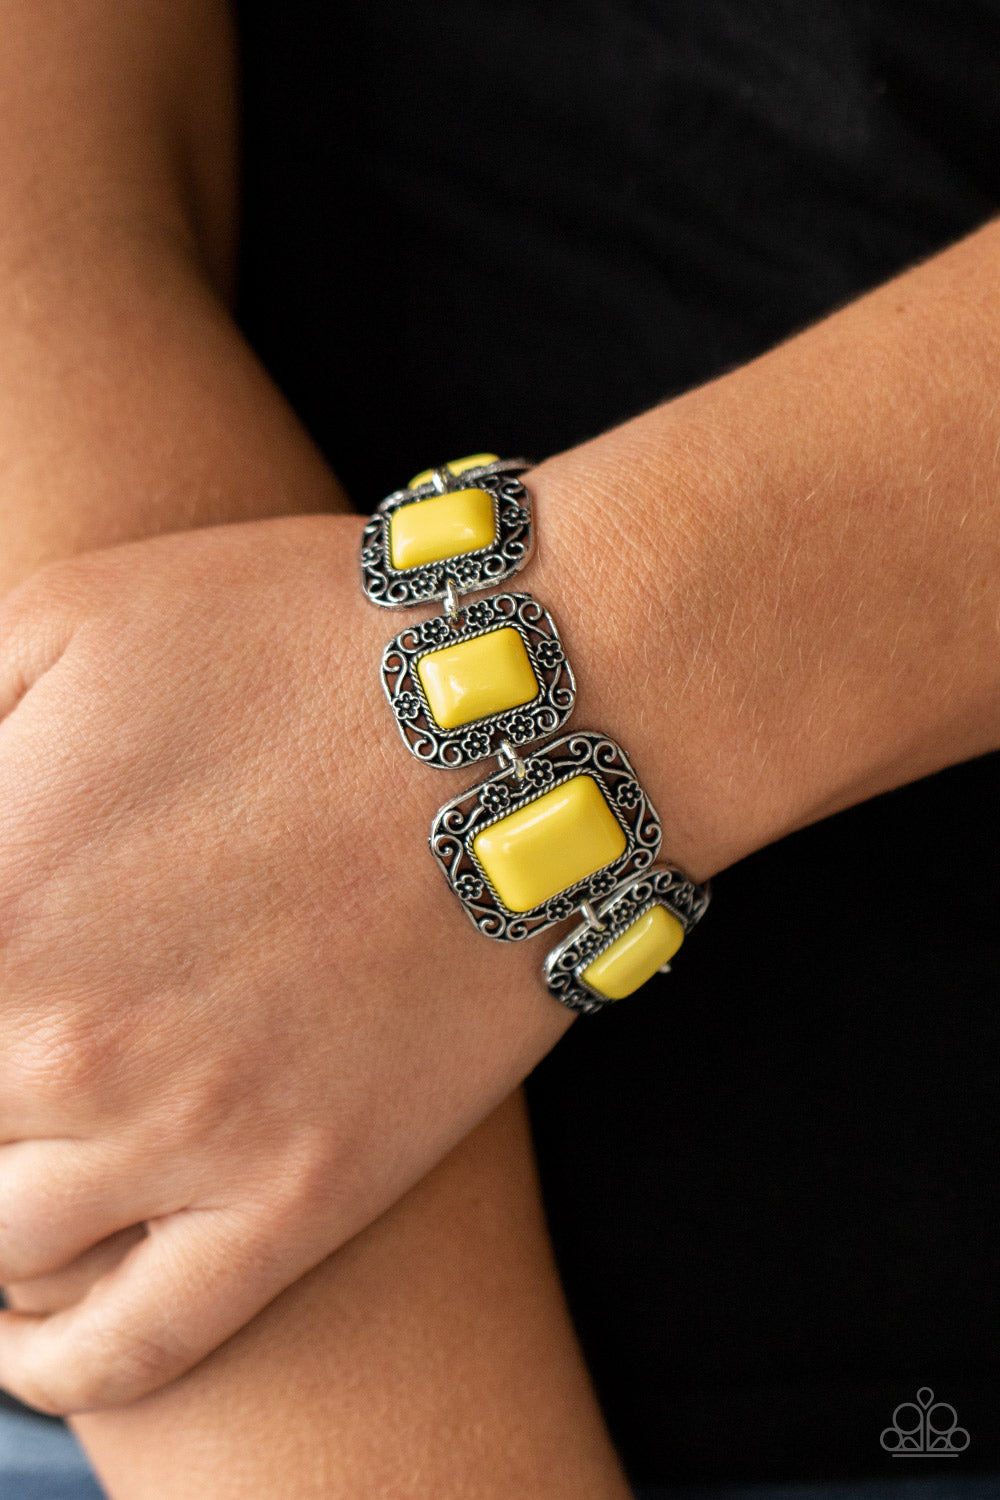 Retro Rodeo - Yellow and Silver Bracelet - Paparazzi Accessories Adjustable Clasp Bracelet Bejeweled Accessories By Kristie Featuring Paparazzi Jewelry  - Trendy fashion jewelry for everyone -